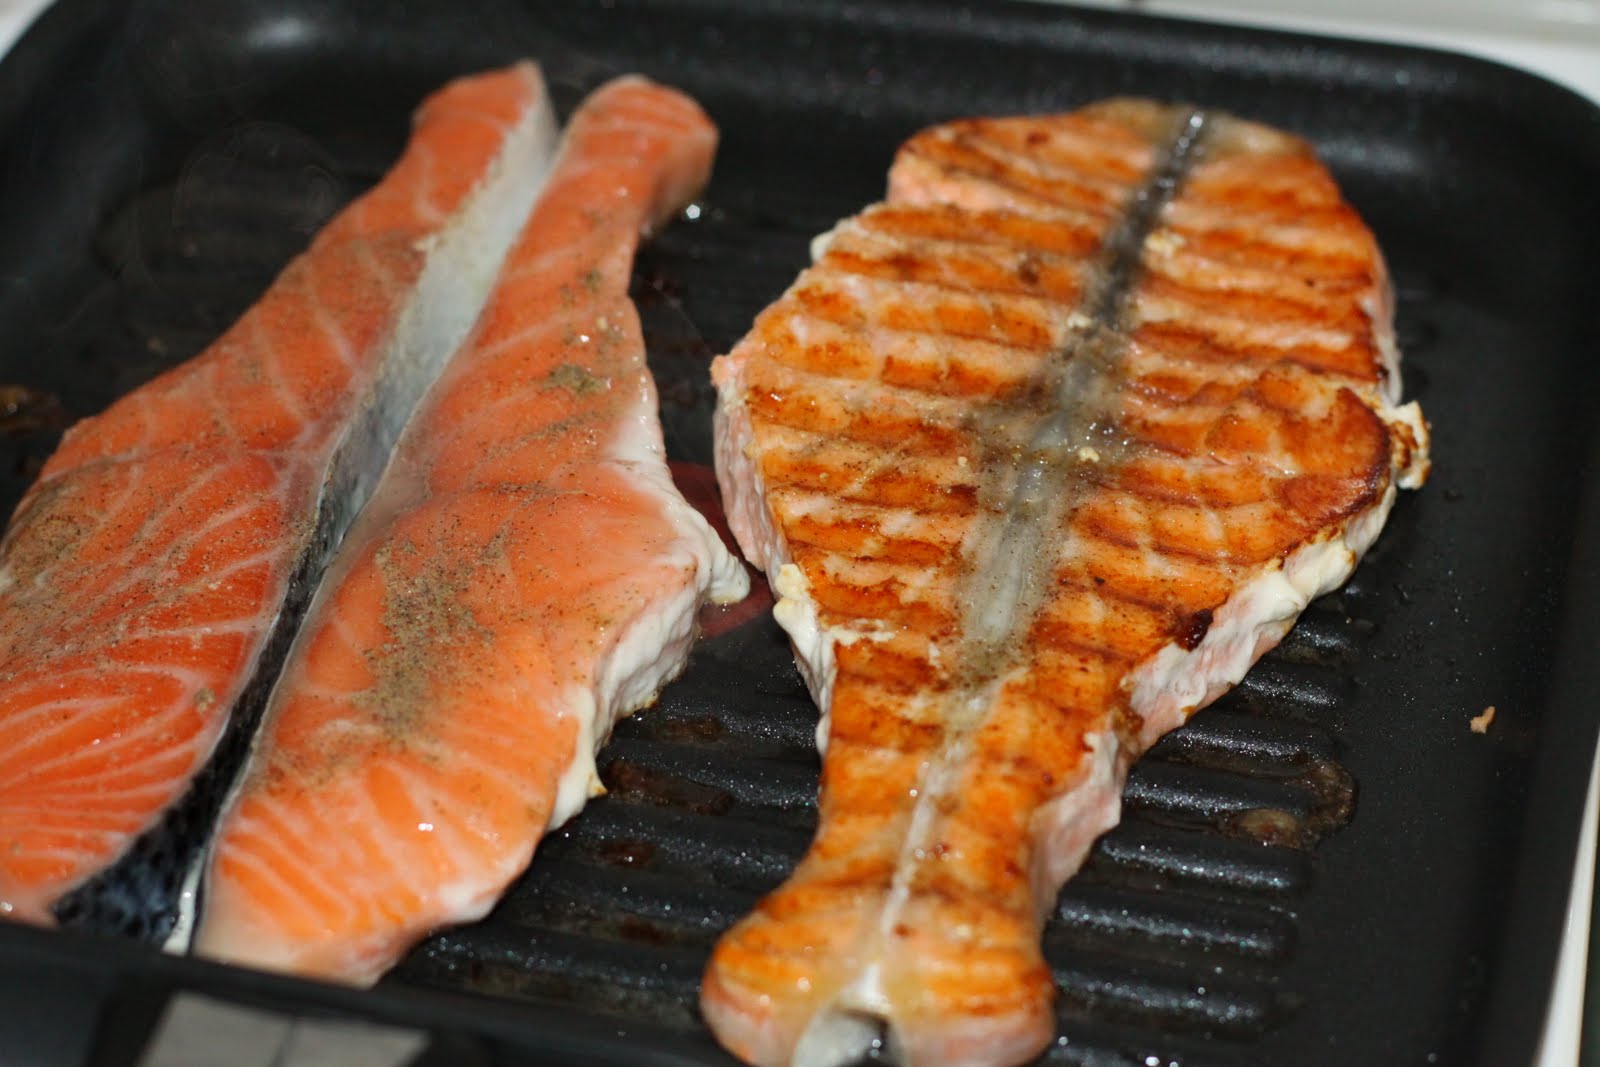 MY COOK BOOK: Grilled Salmon With Mushroom